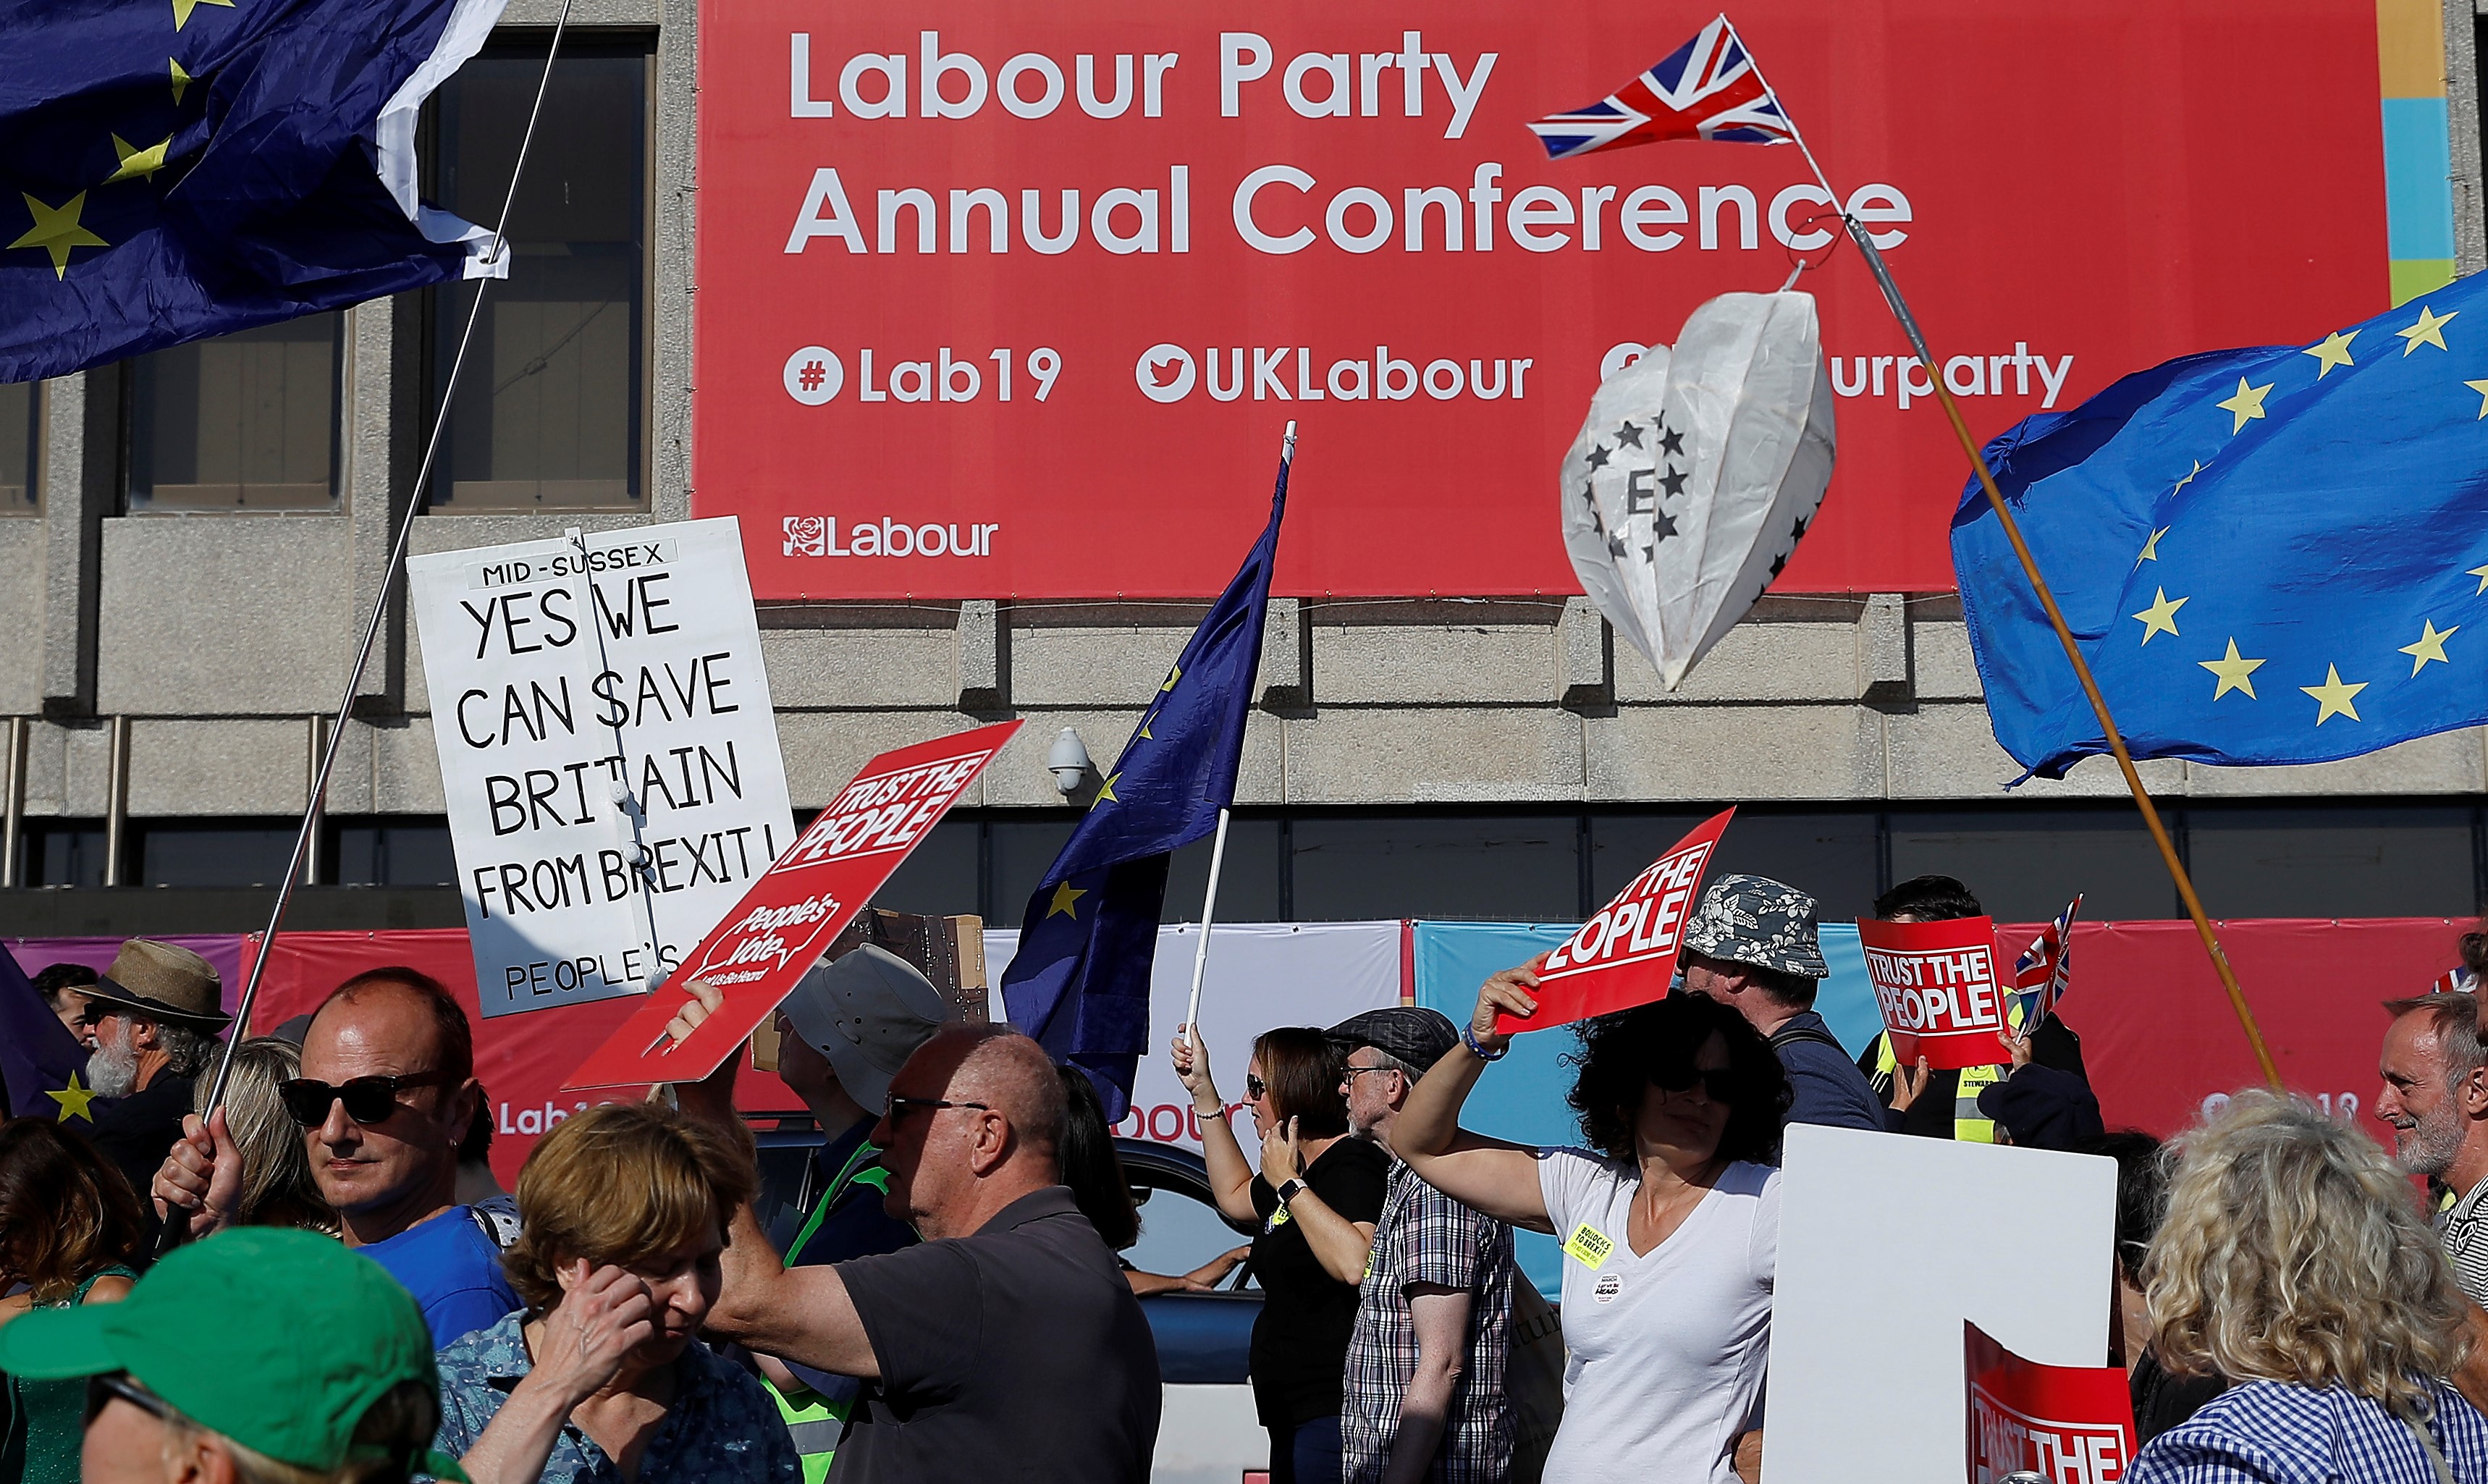 Participants in a People's Vote demonstration walk past the Brighton Centre where the Labour Party Annual Conference is being held, in Brighton, Britain, September 21, 2019.